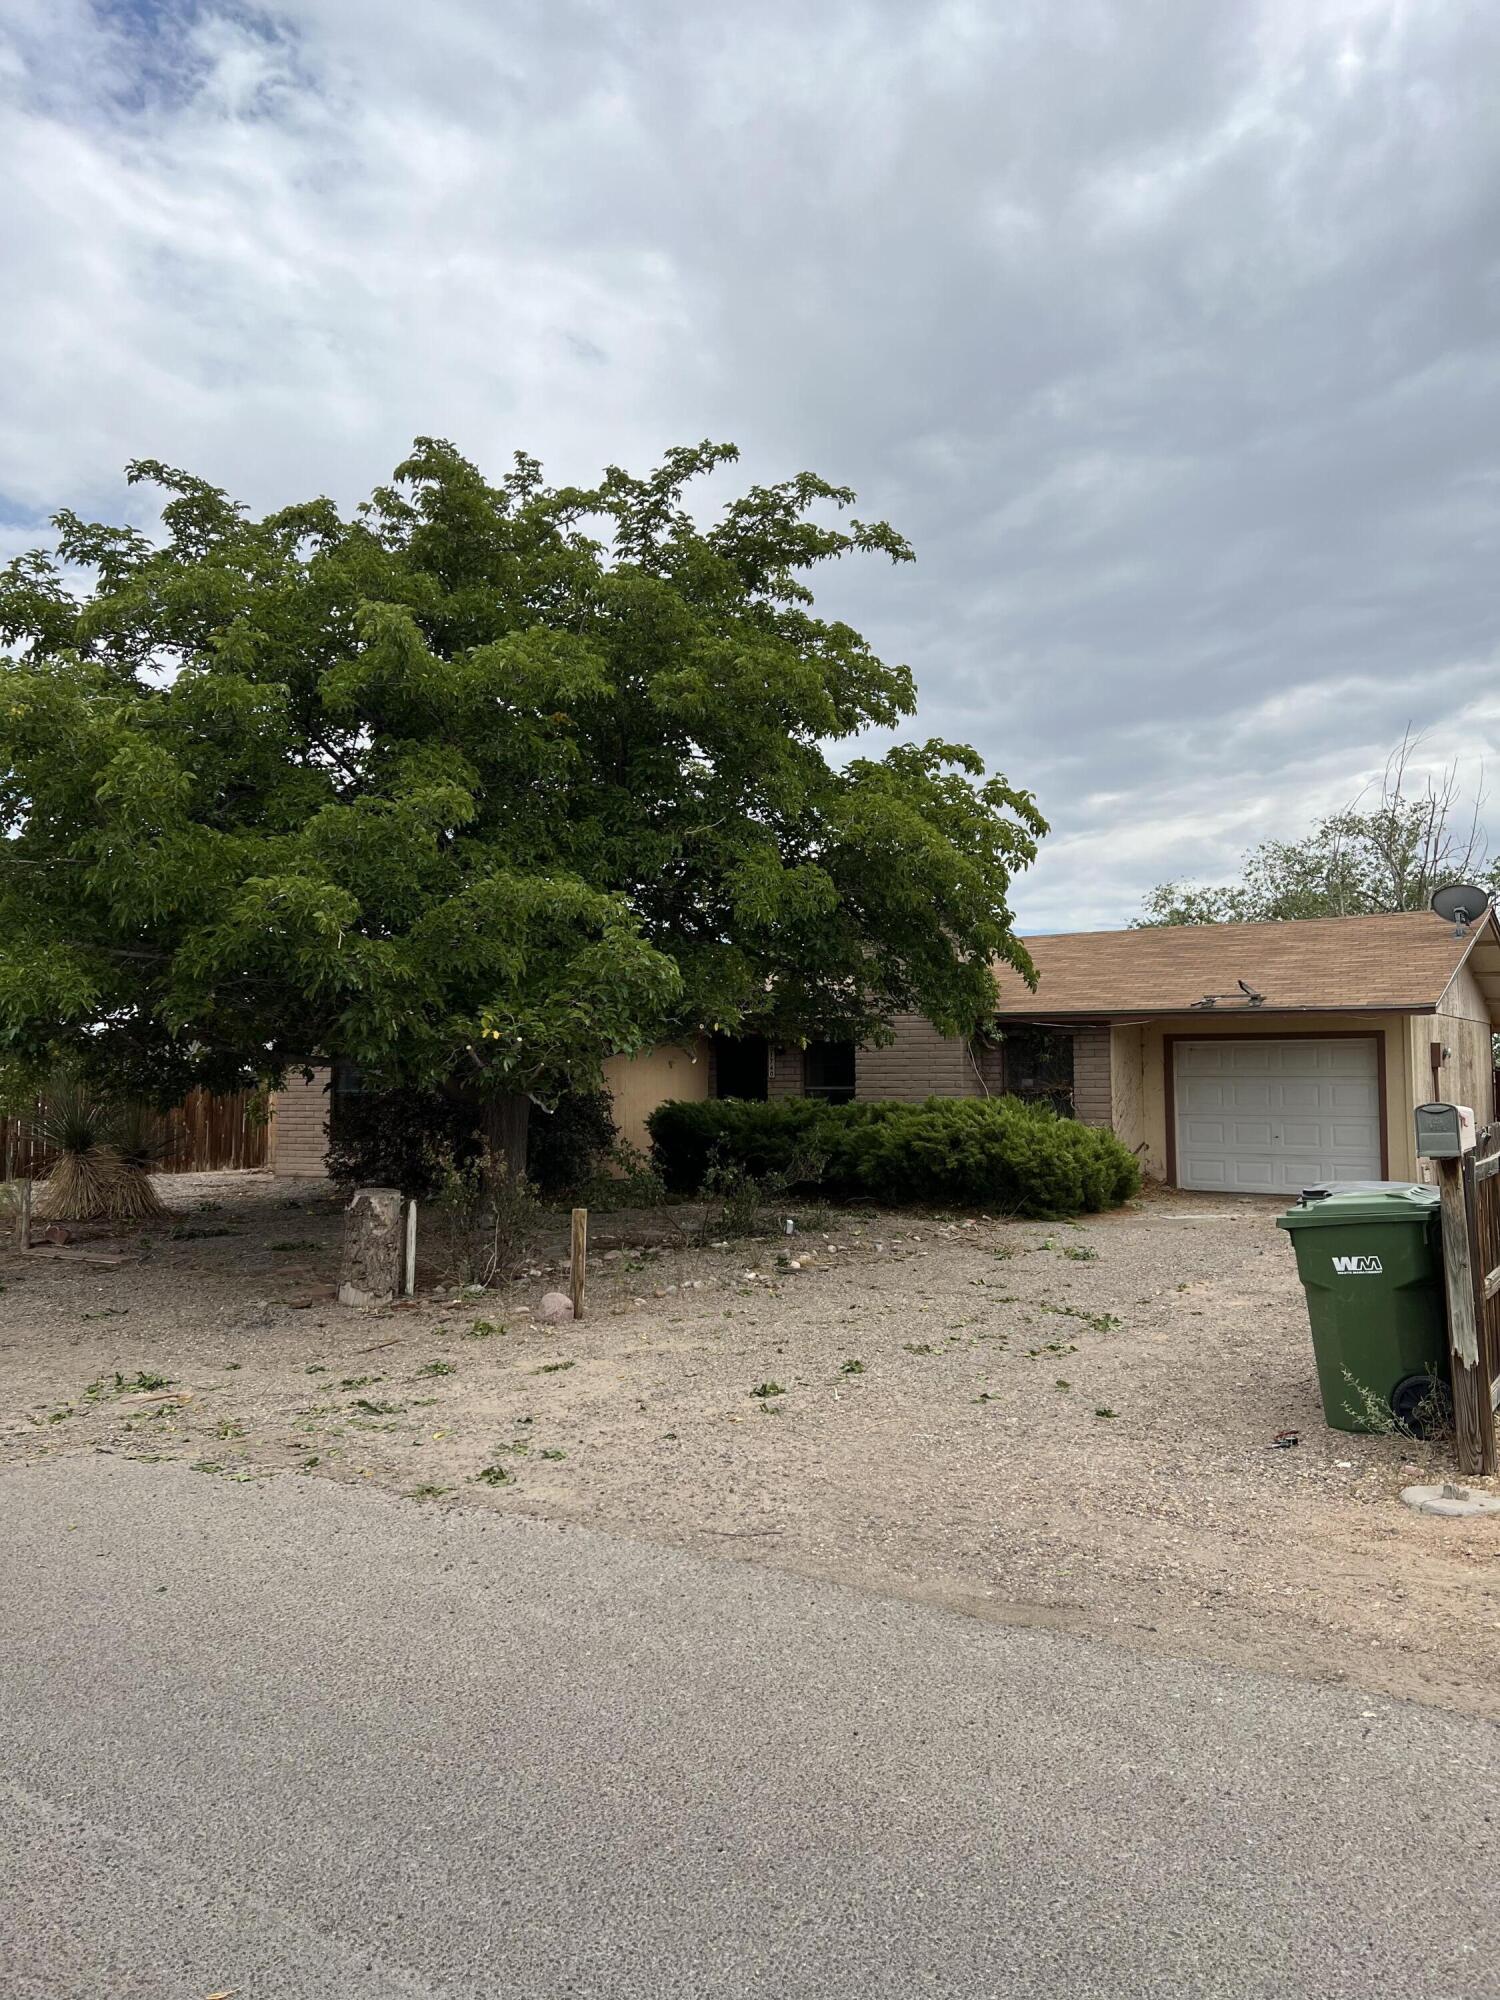 This property is a fixer upper with great potential. This home is 3 bedrooms 2 bathrooms it also has a good size backyard with a concrete patio and side yard access.